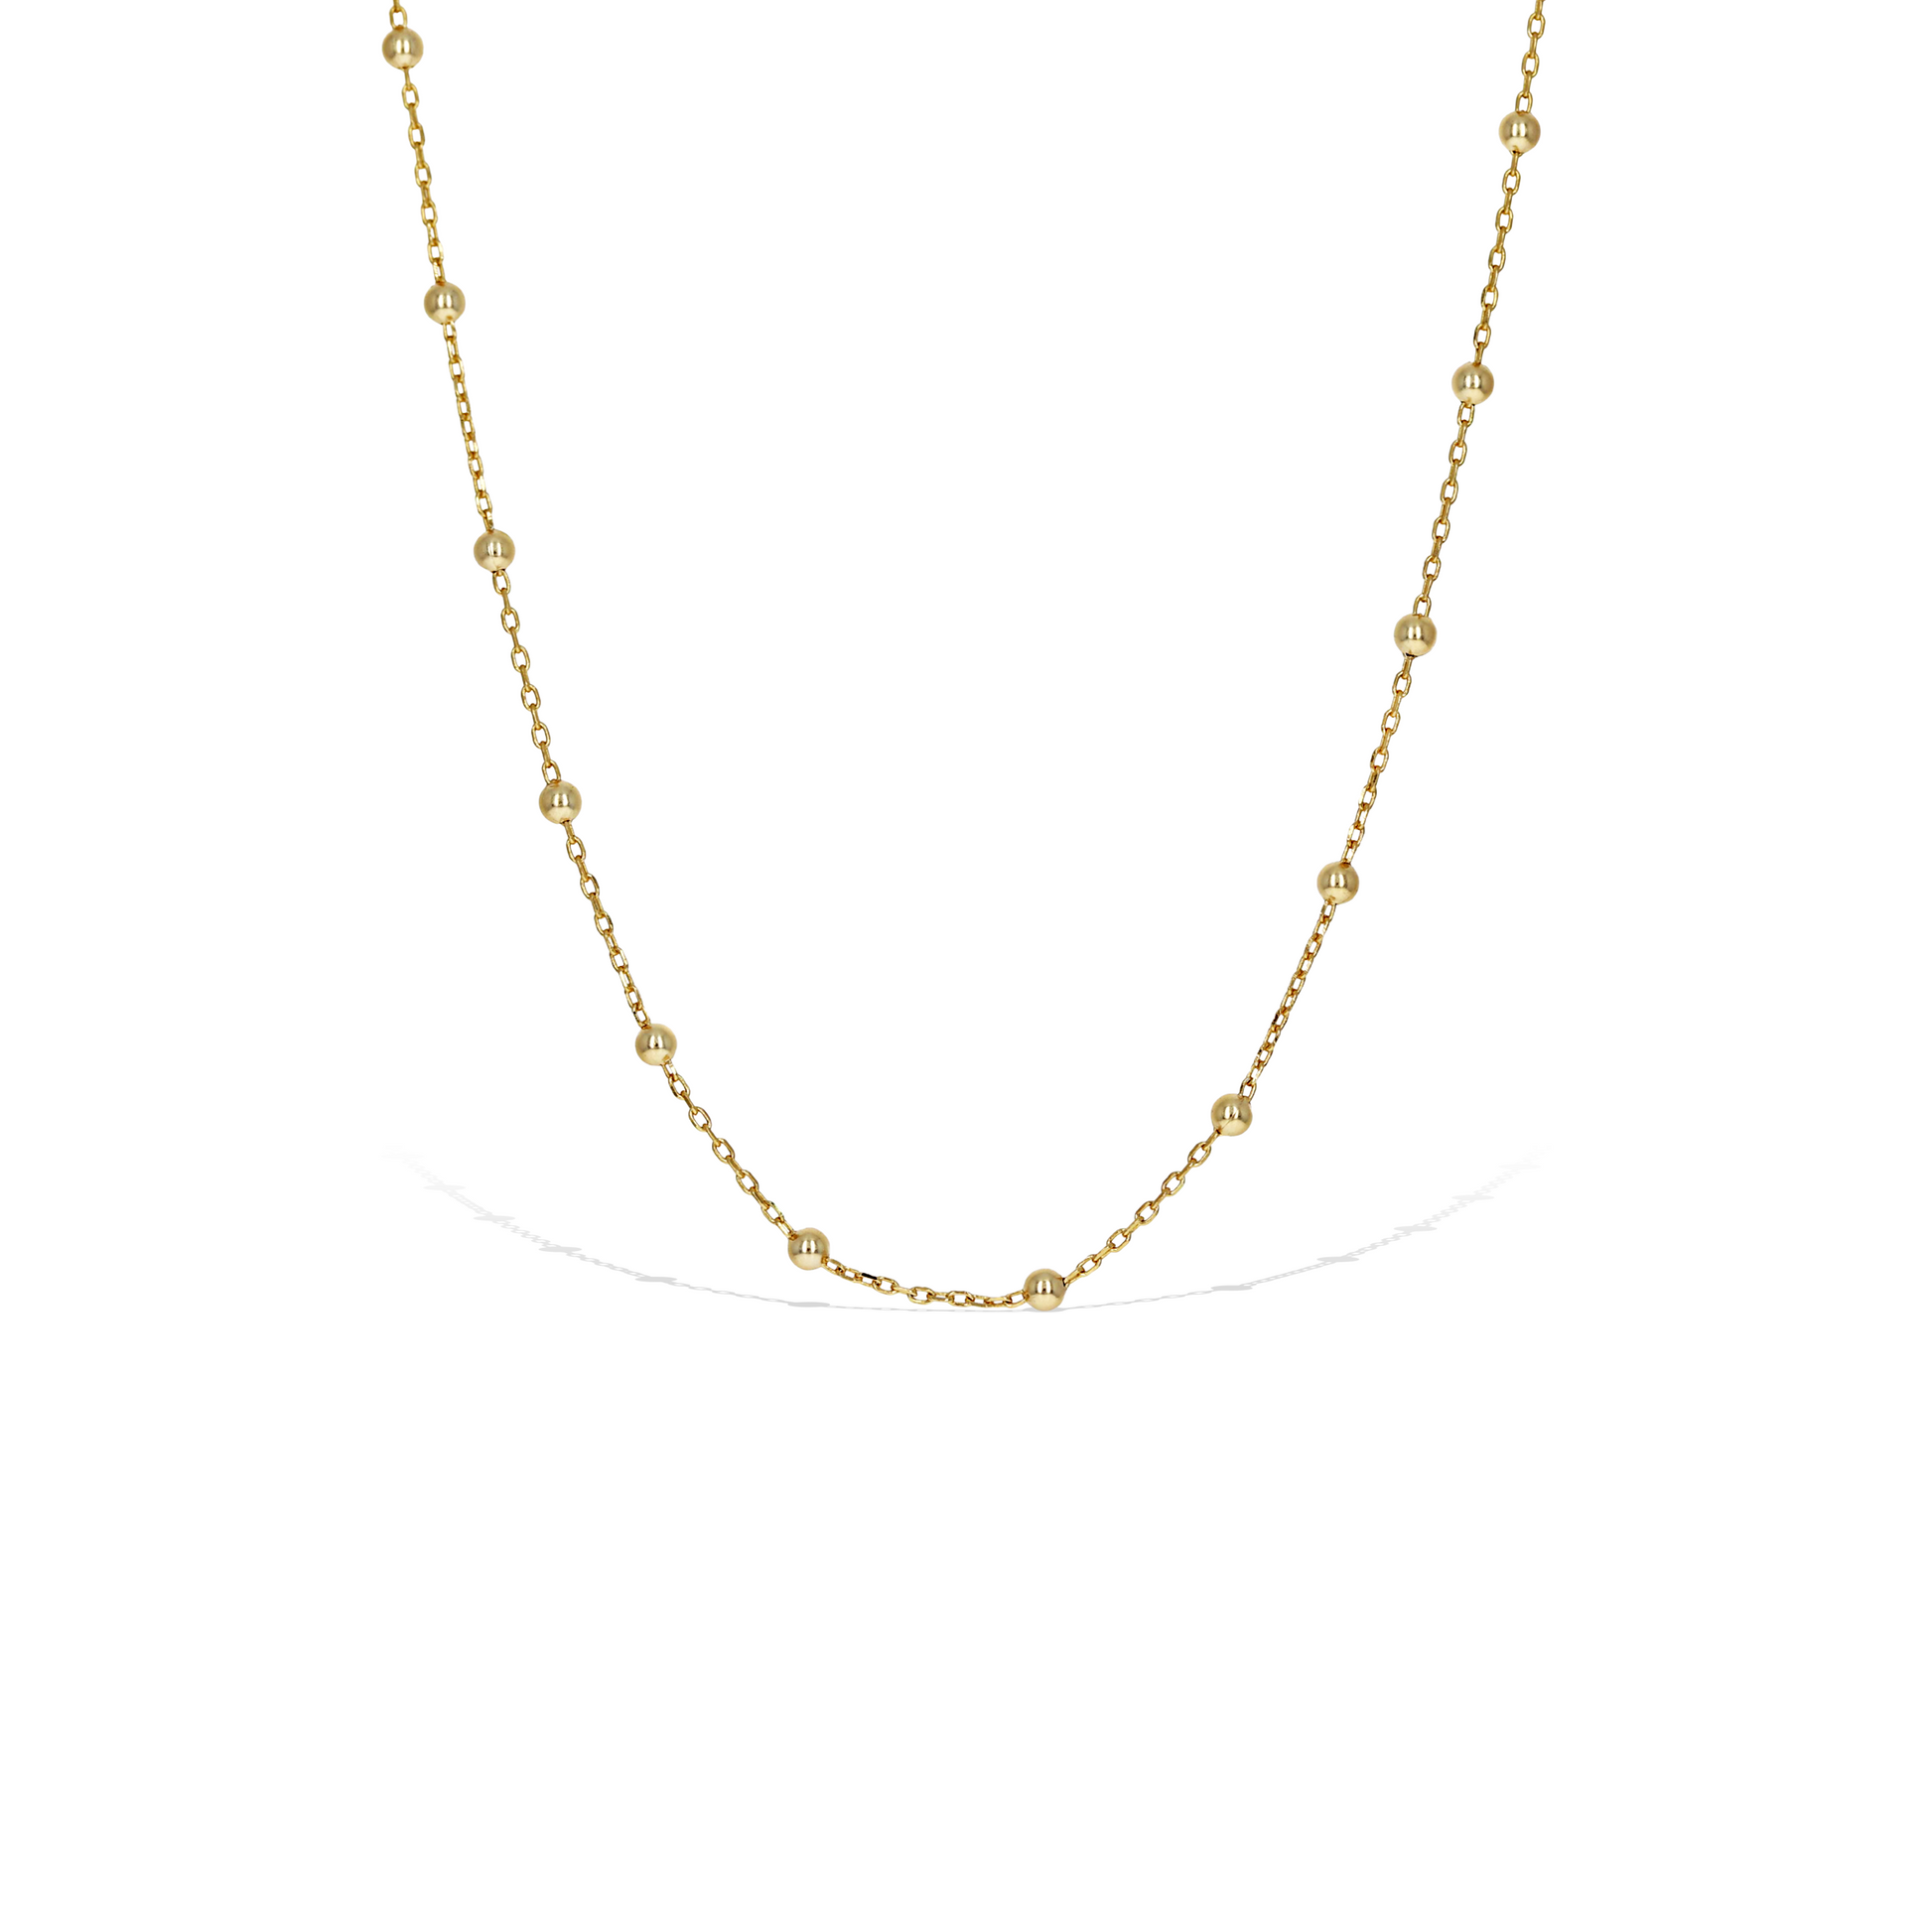 Gold Plated Sterling Silver Thin Chain Choker Necklace - Alexandra Marks Jewelry